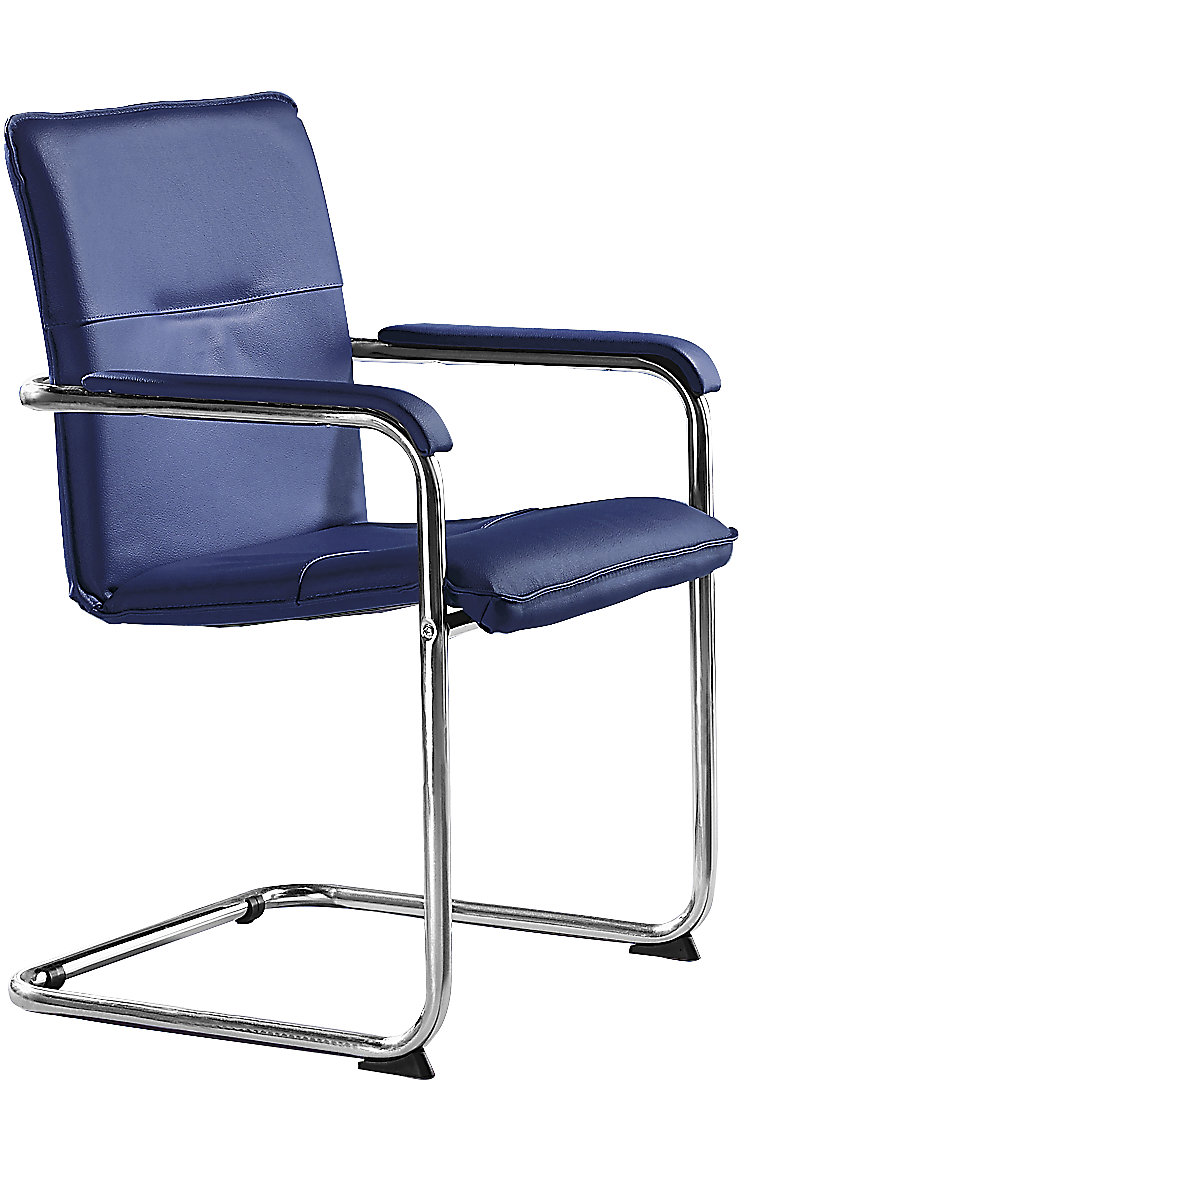 Cantilever Chair With Genuine Leather, Cantilever Leather Chair